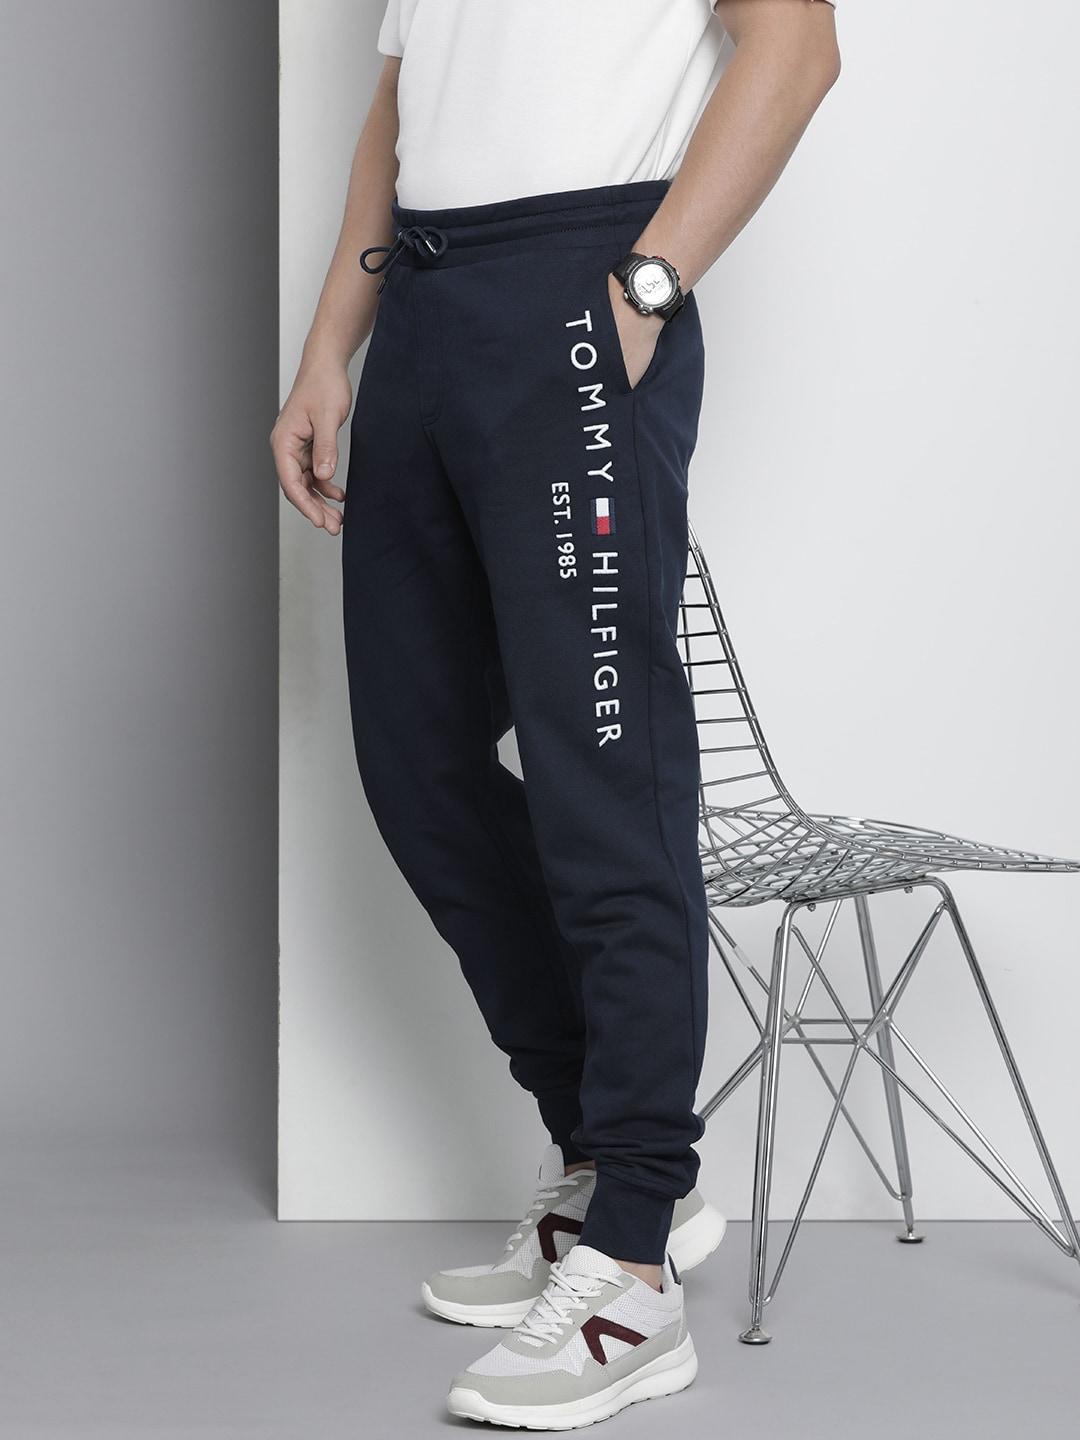 tommy-hilfiger-men-pure-cotton-brand-logo-embroidered-joggers